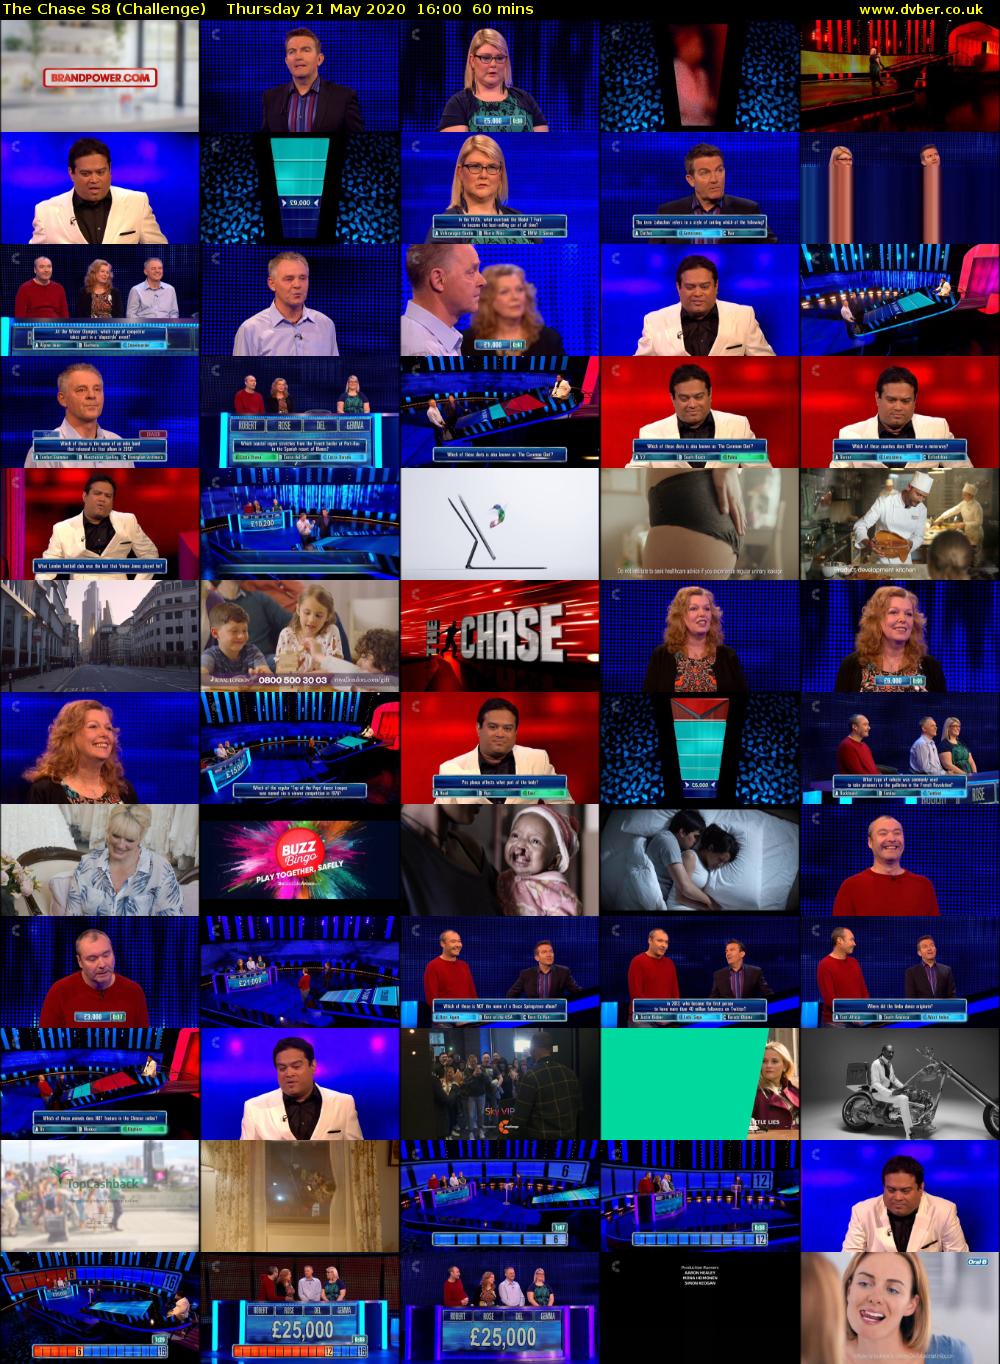 The Chase S8 (Challenge) Thursday 21 May 2020 16:00 - 17:00